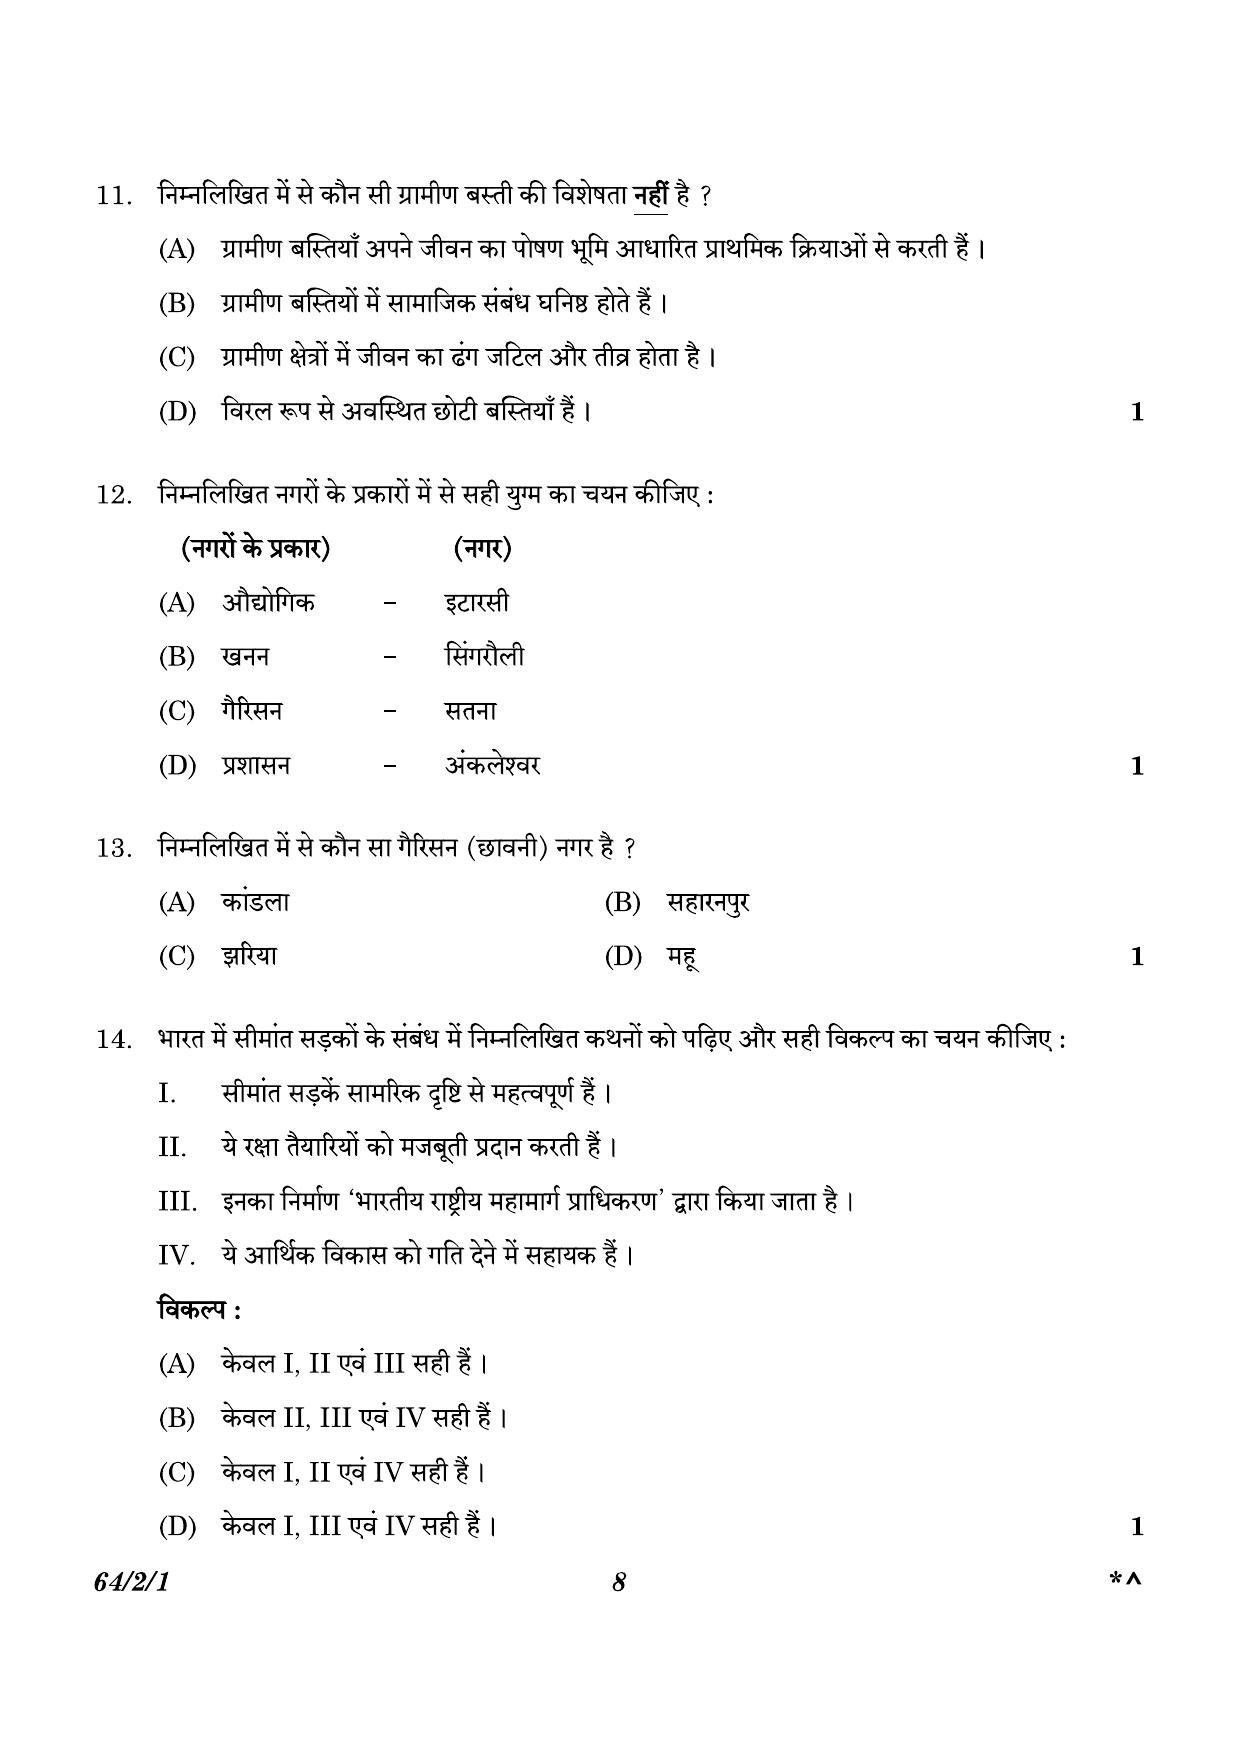 CBSE Class 12 64-2-1 Geography 2023 Question Paper - Page 8